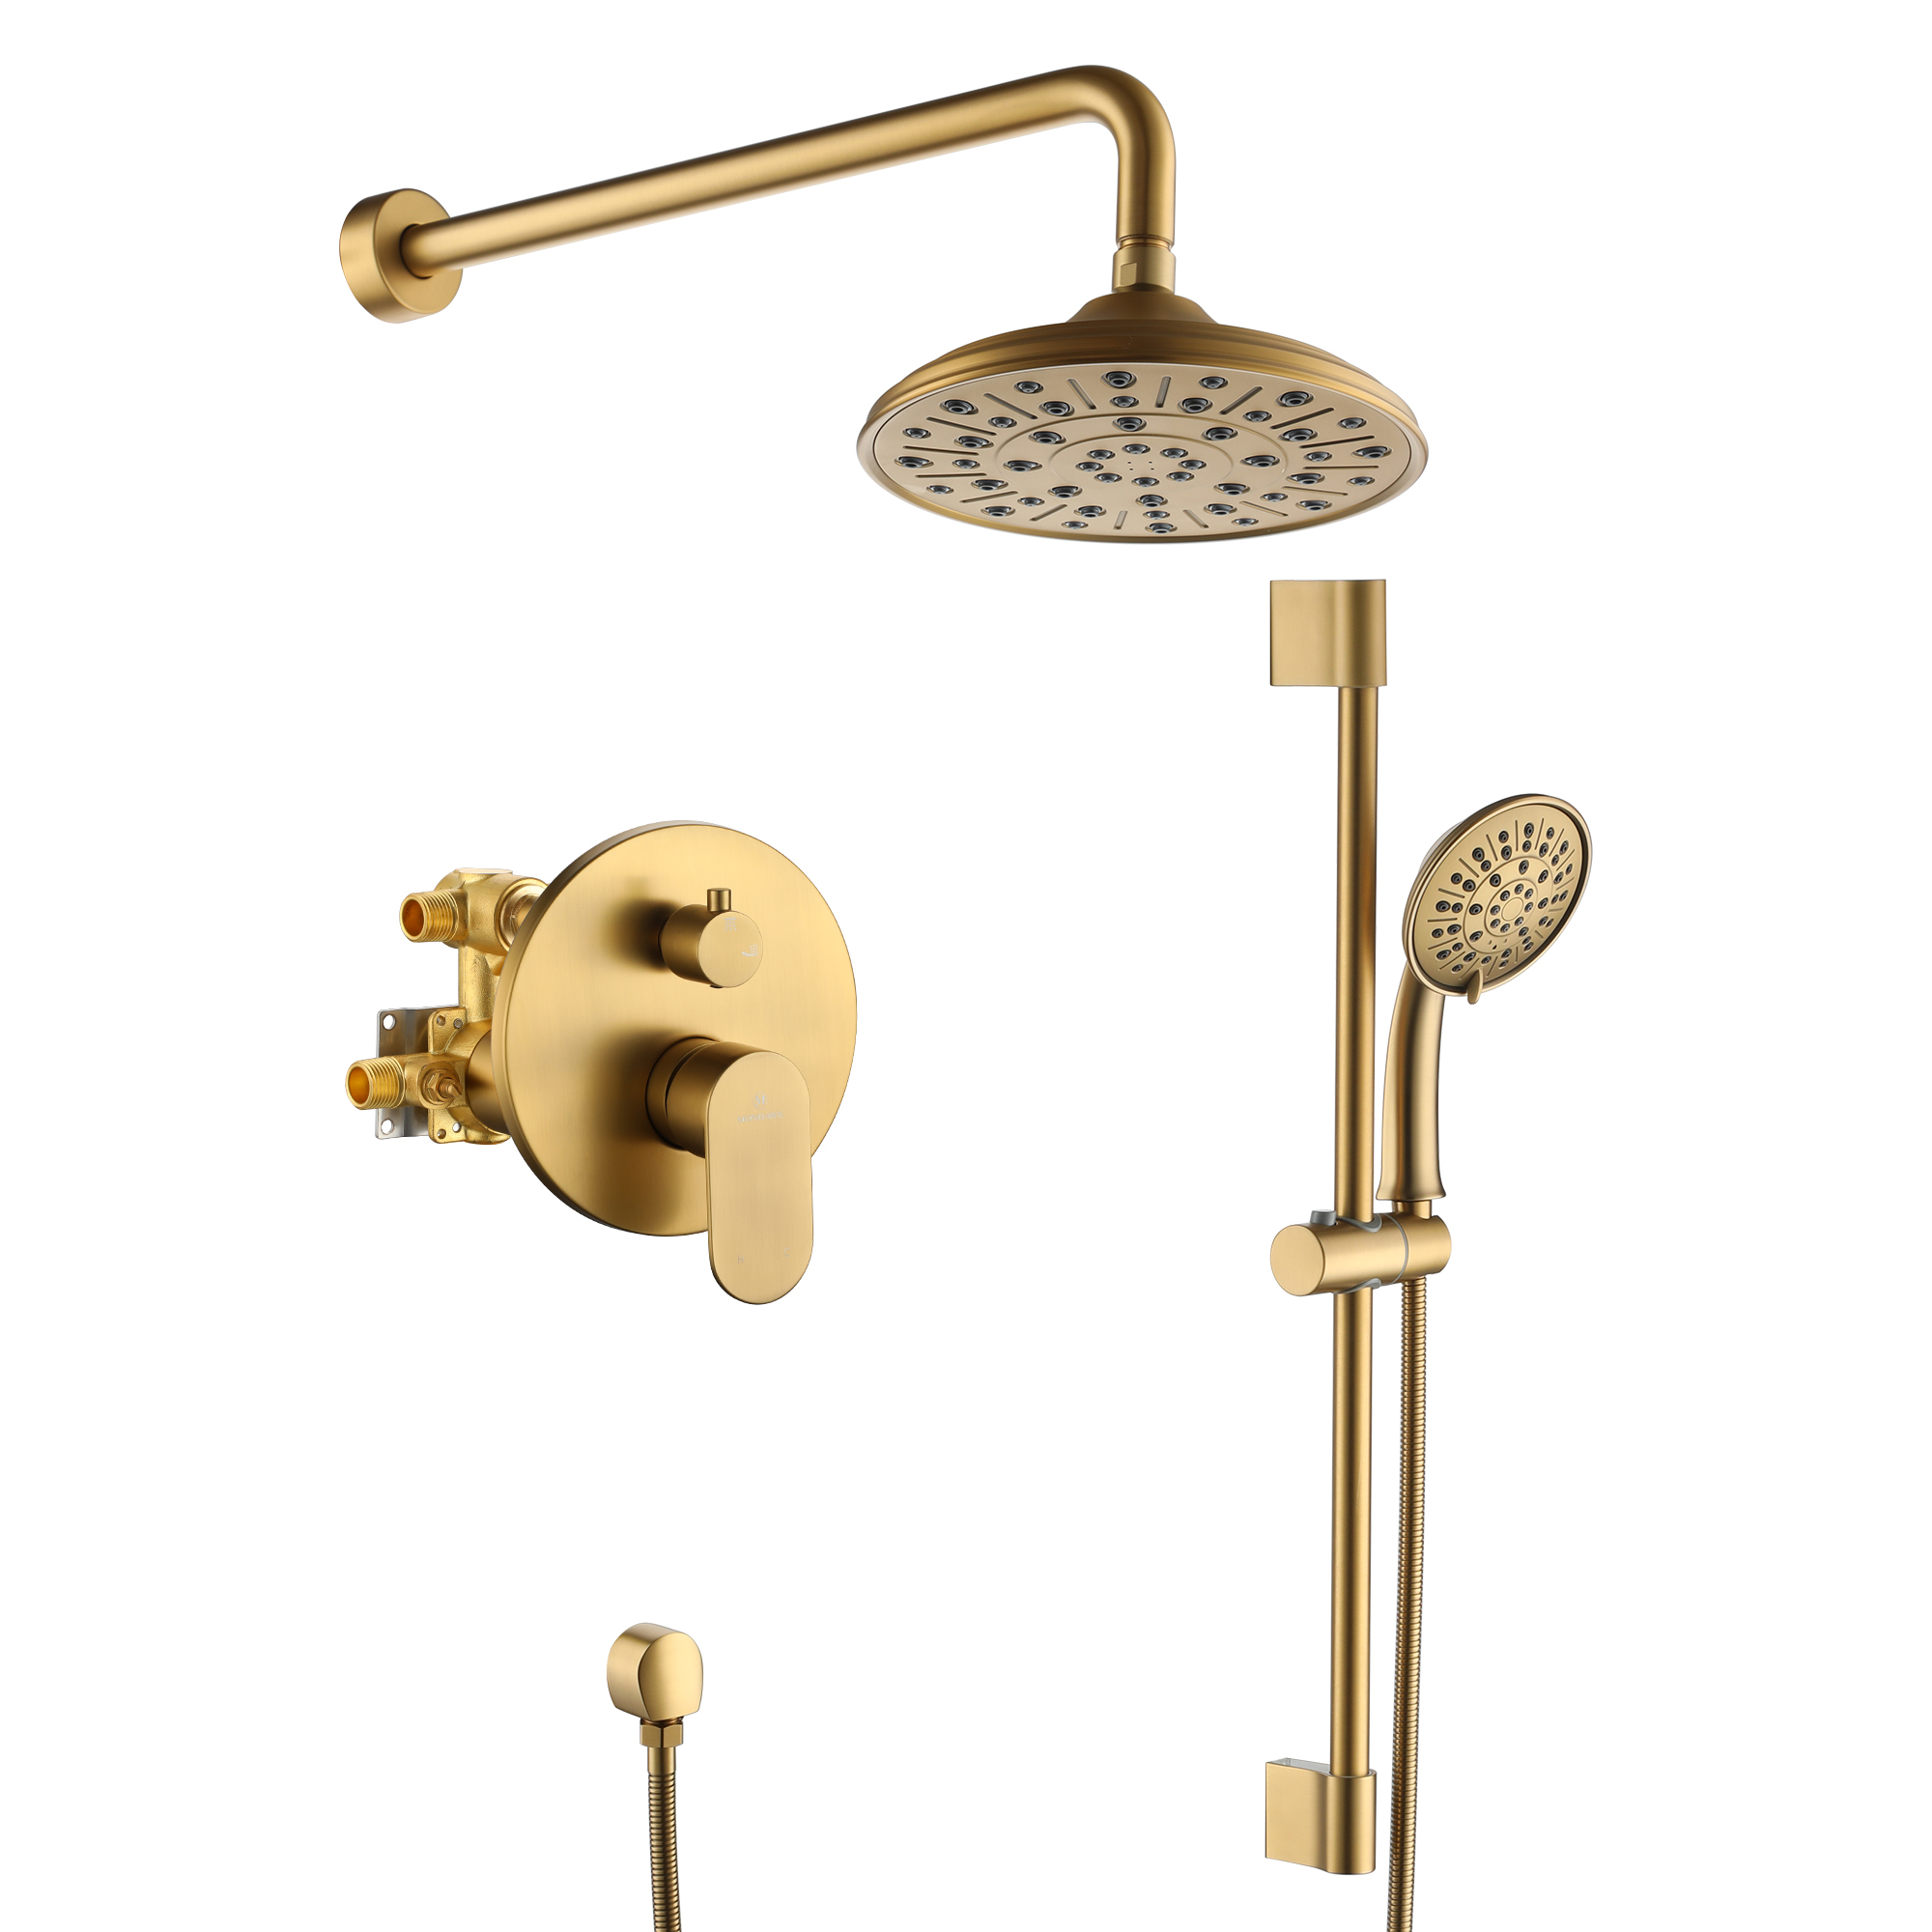 3815BGMondawe Retro Series 2-Spray Patterns with 1.8 GPM 8 in. Rain Wall Mount Dual Shower Heads with Handheld and Spout in Brushed Nickel/ Black/ Bronze/Brushed Gold-Mondawe